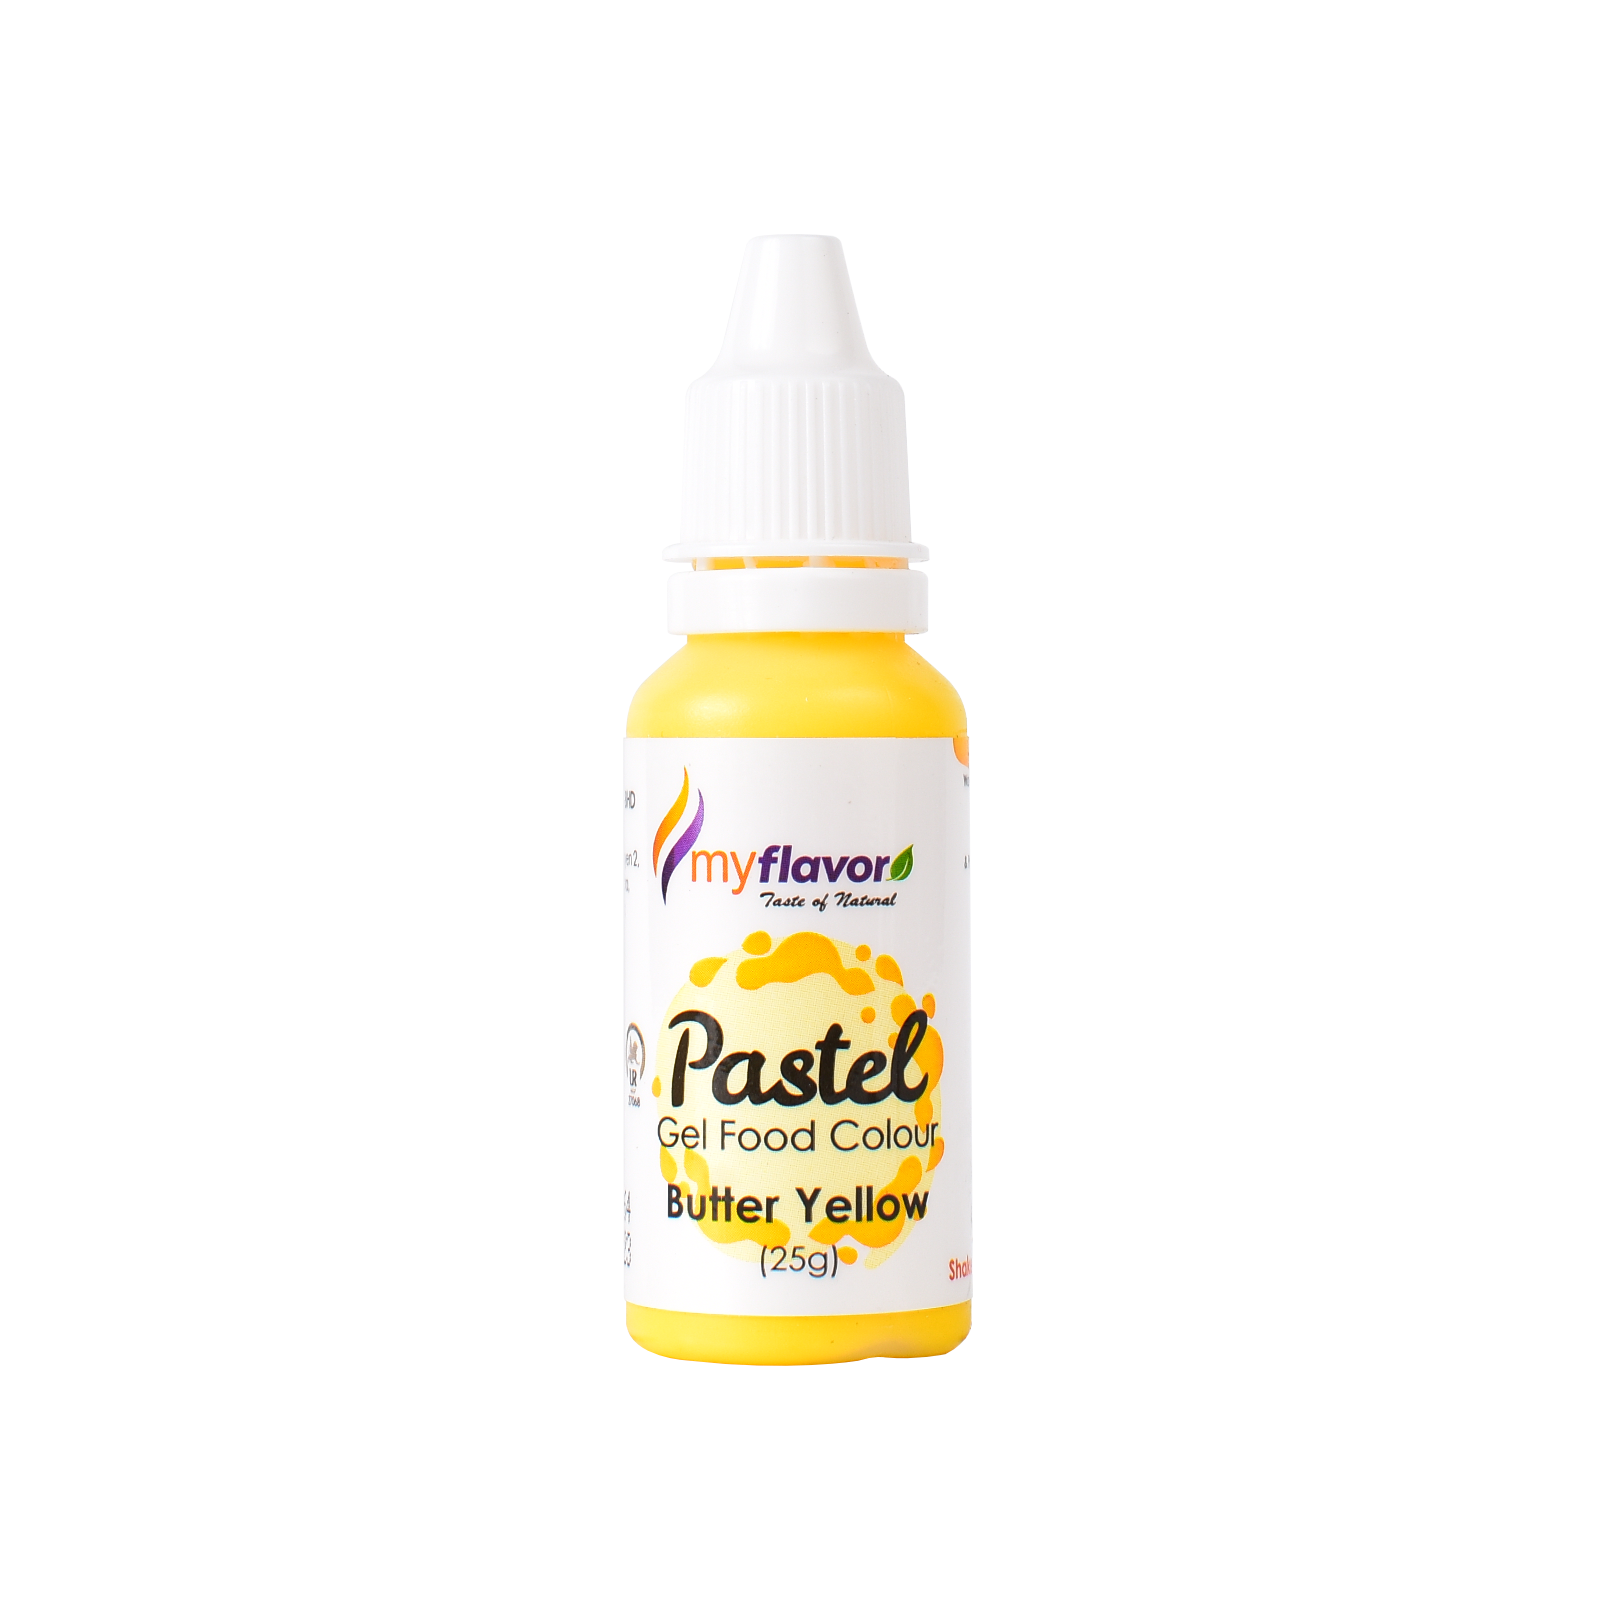 My Flavor Butter Yellow Pastel Gel Food Colour 25g.png